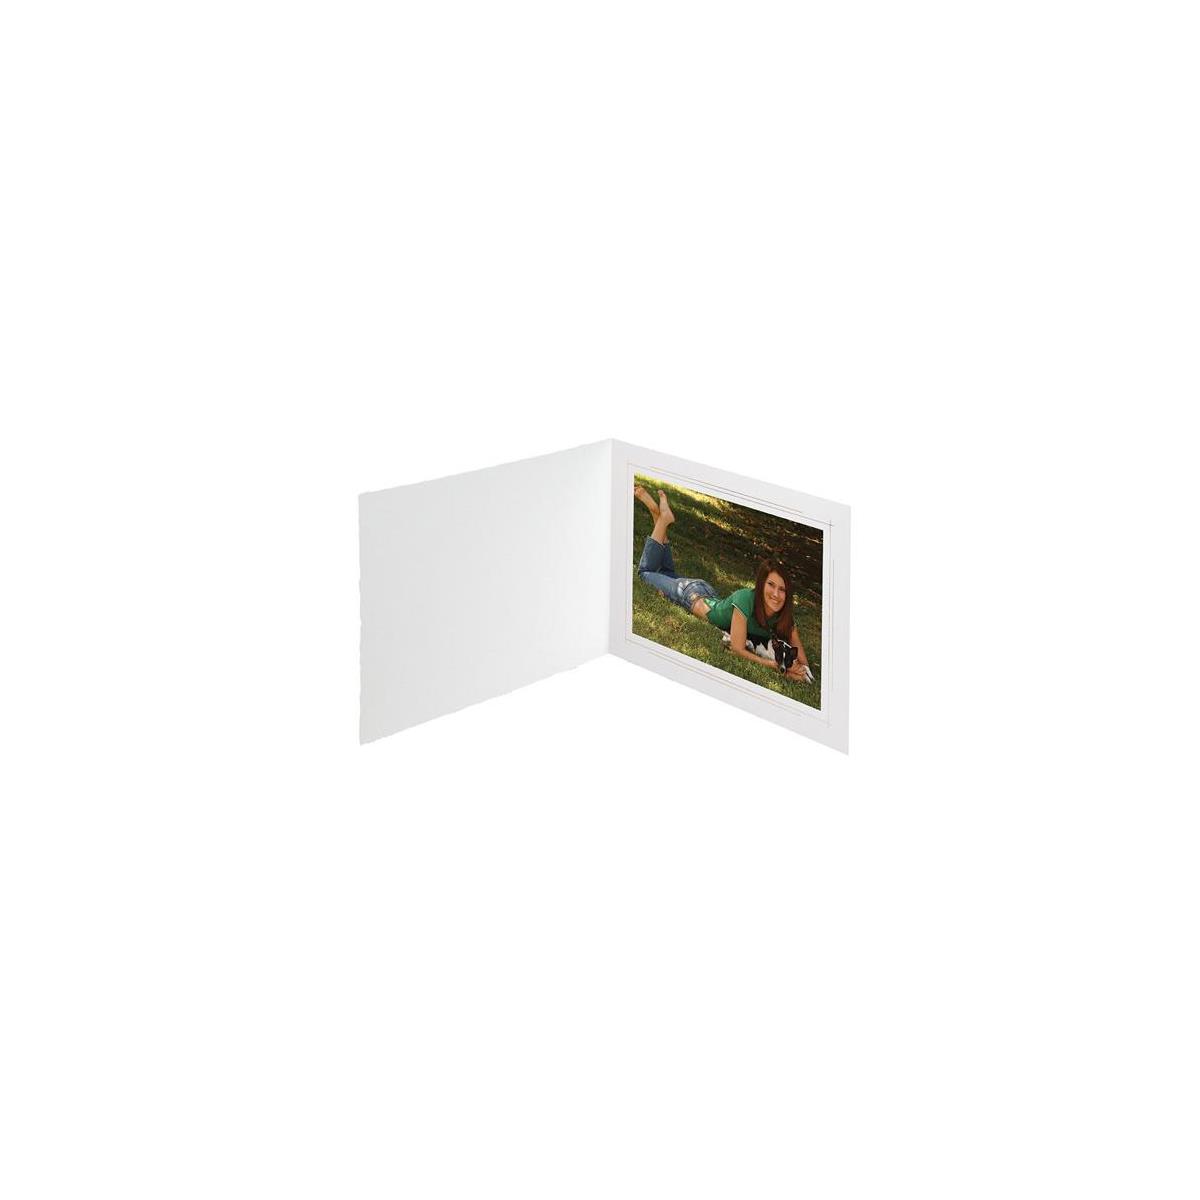 Image of TAP Picture Folder Frame Whitehouse